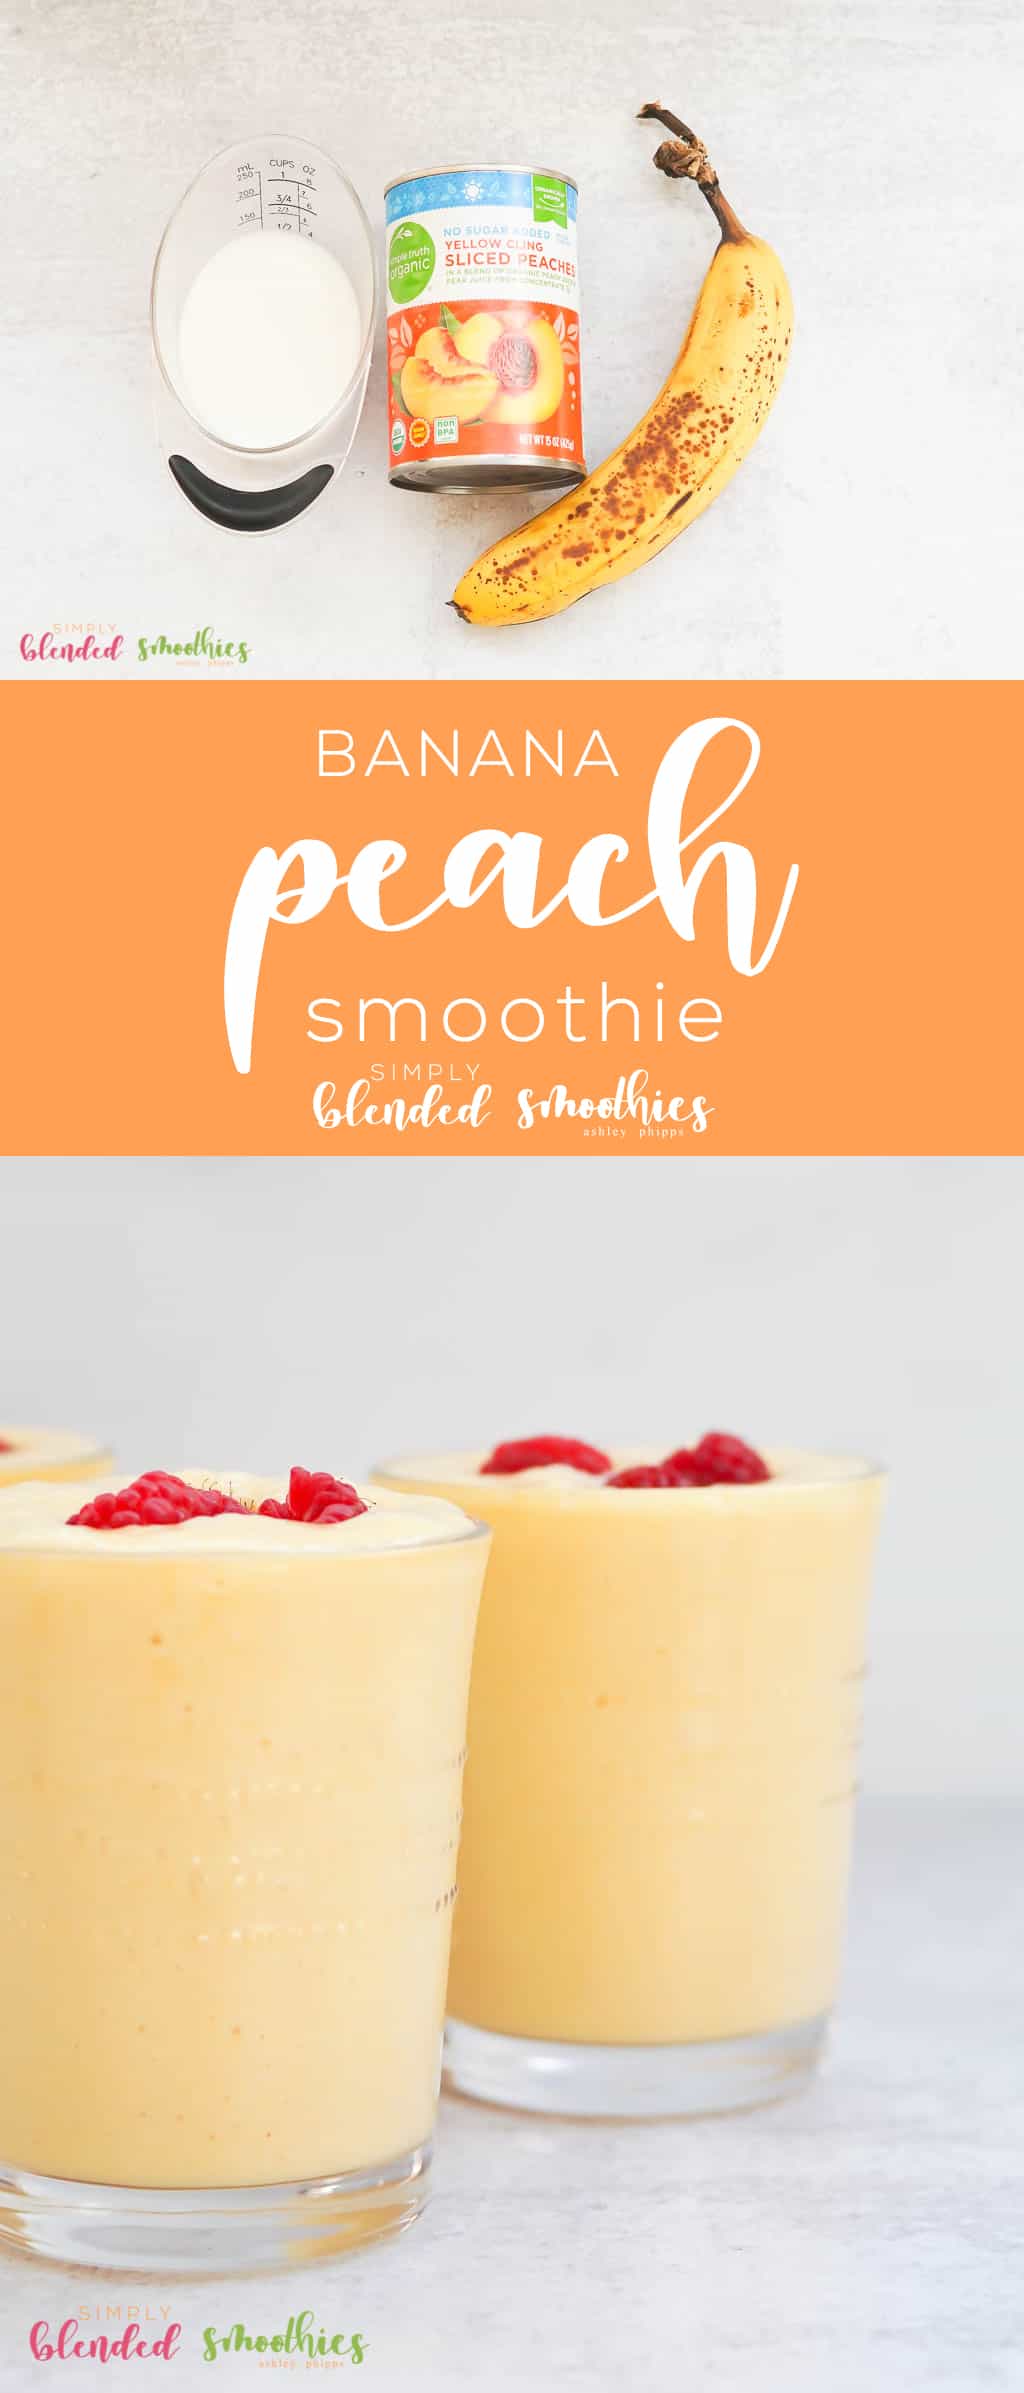 This Banana Peach Smoothie Is The Perfect Way To Use Canned Or Fresh Fruits You Have At Home In A Delicious Refreshing Smoothie